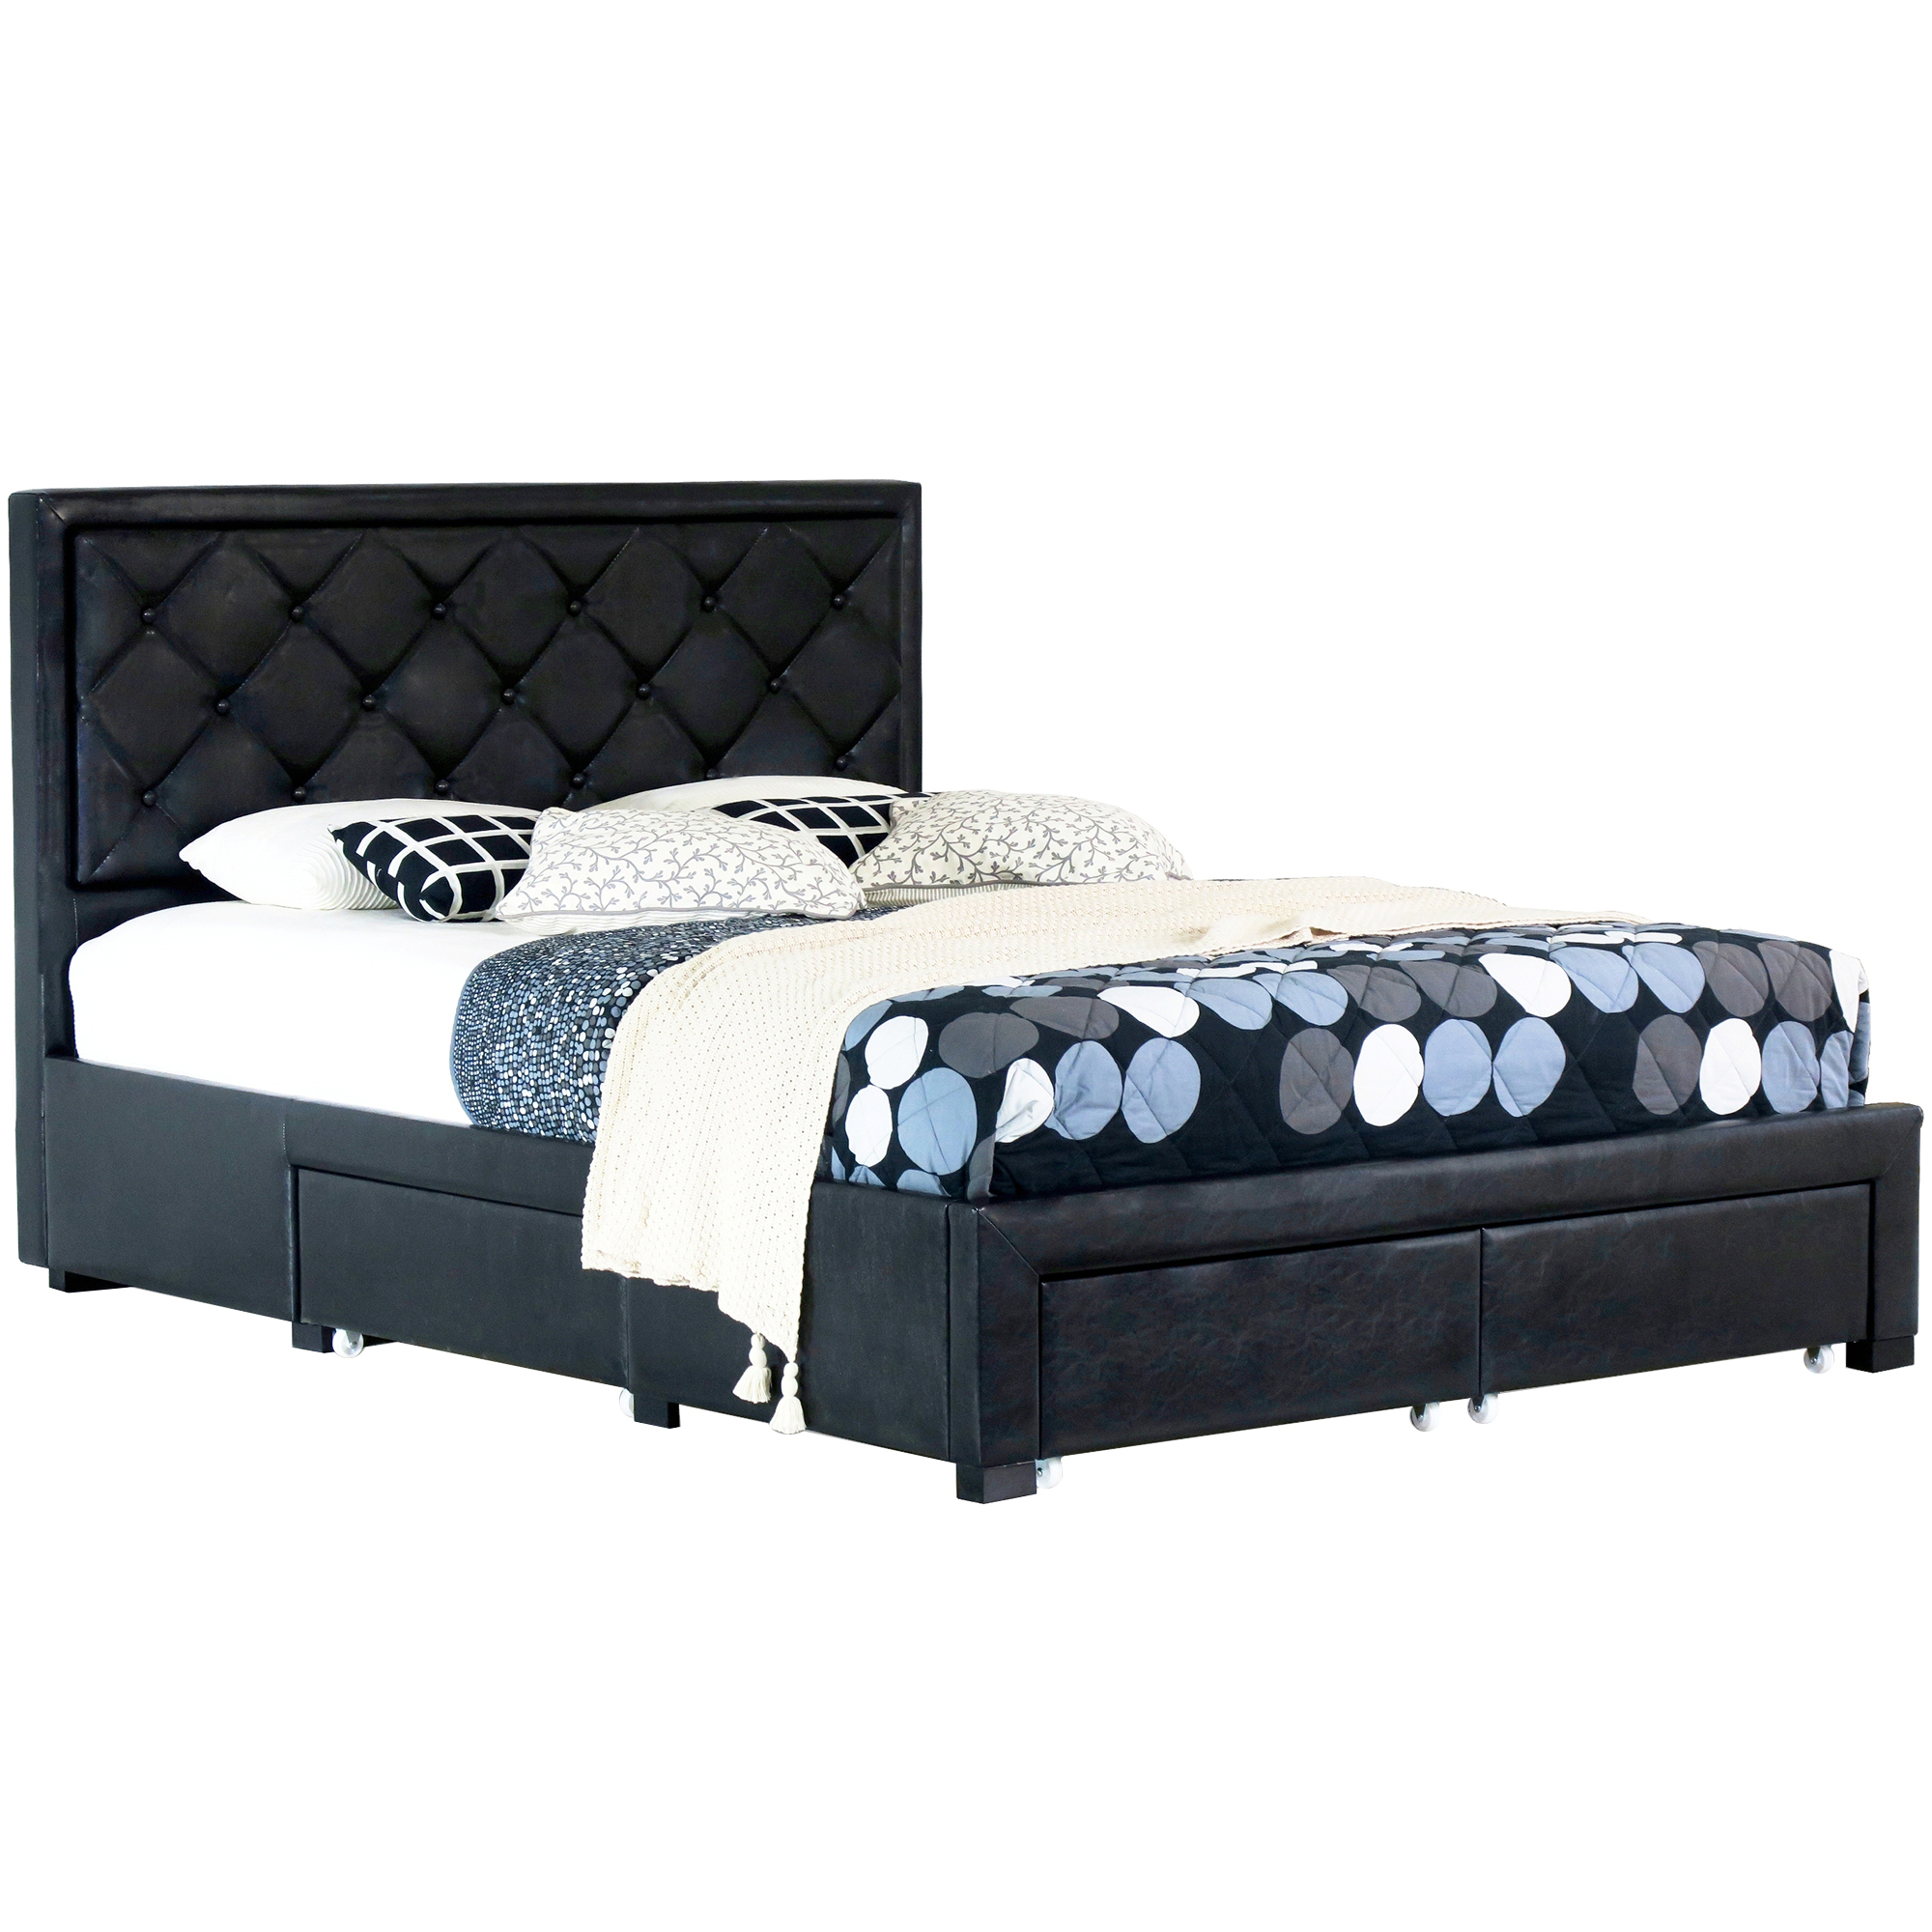 Faux Leather Bed Frame With Storage, Faux Leather Sleigh Bed With Drawers